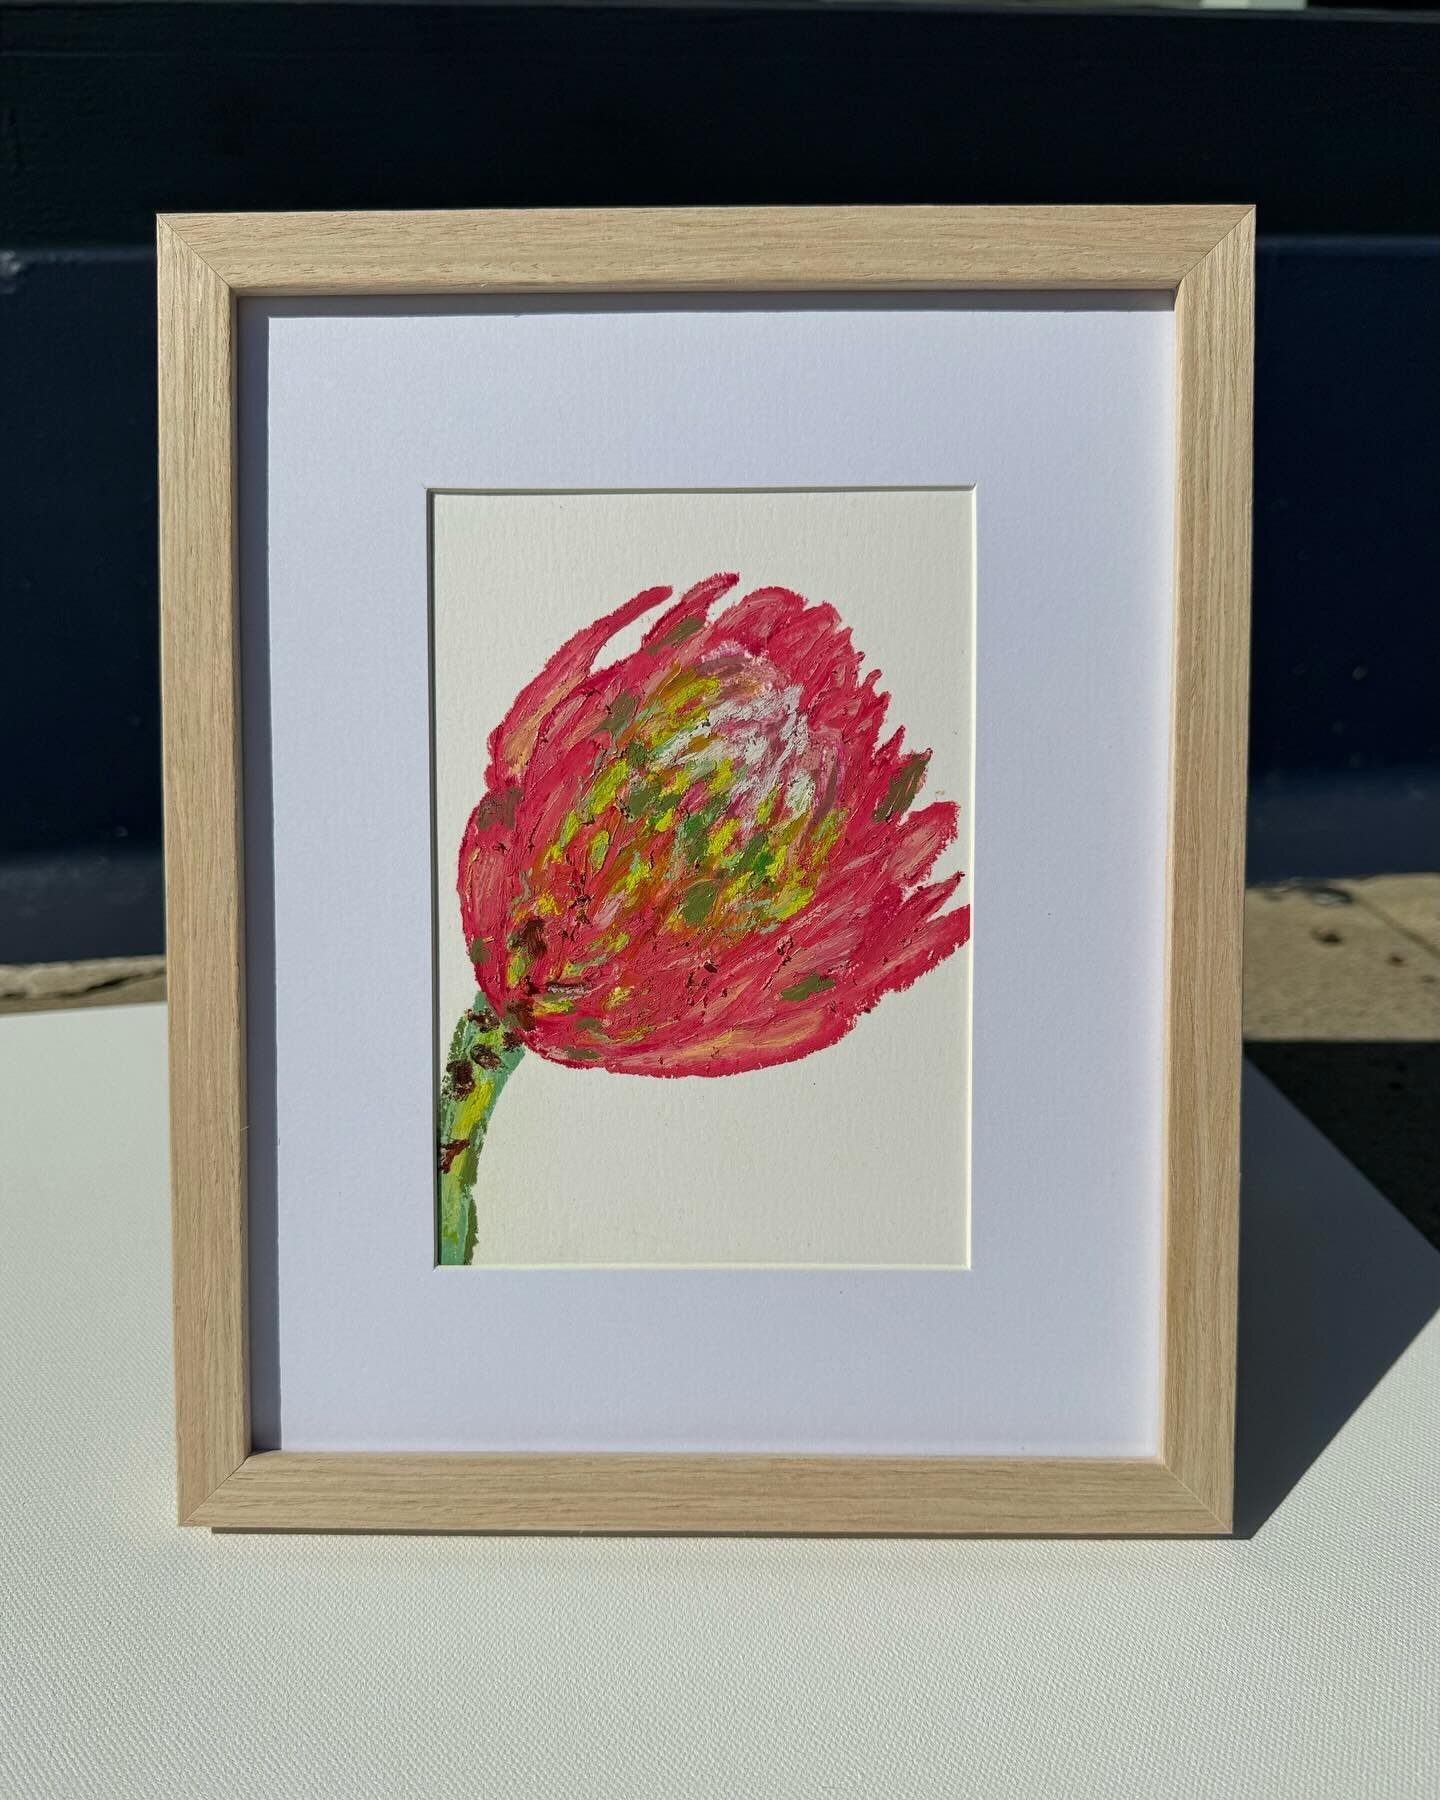 king protea magic wand - 5x7&rdquo; oil pastel on mixed media paper framed to 8x10&rdquo; | $90, dm me if interested 
.
.
.
#oilpastelpainting #flowerpainting #lilypainting #instaartist #creativelife #originalart #homedecor